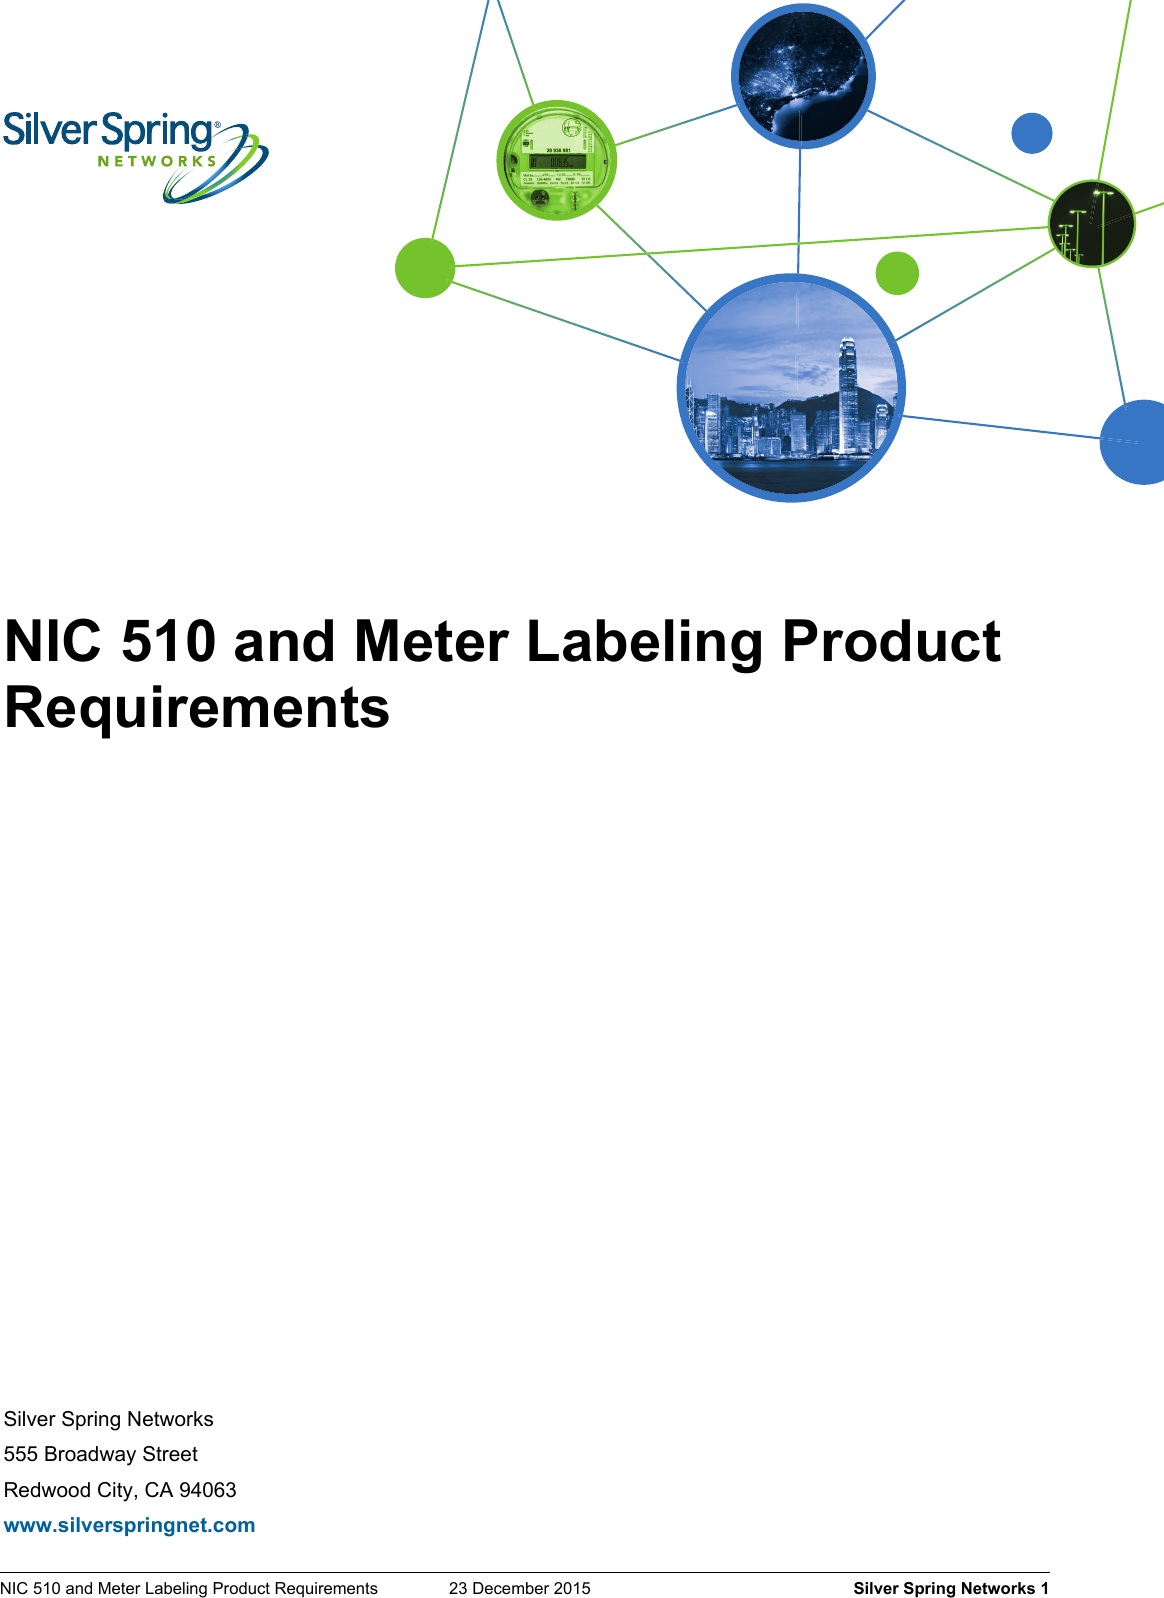 NIC 510 and Meter Labeling Product Requirements  23 December 2015    Silver Spring Networks 1Silver Spring Networks555 Broadway StreetRedwood City, CA 94063www.silverspringnet.comNIC 510 and Meter Labeling Product Requirements